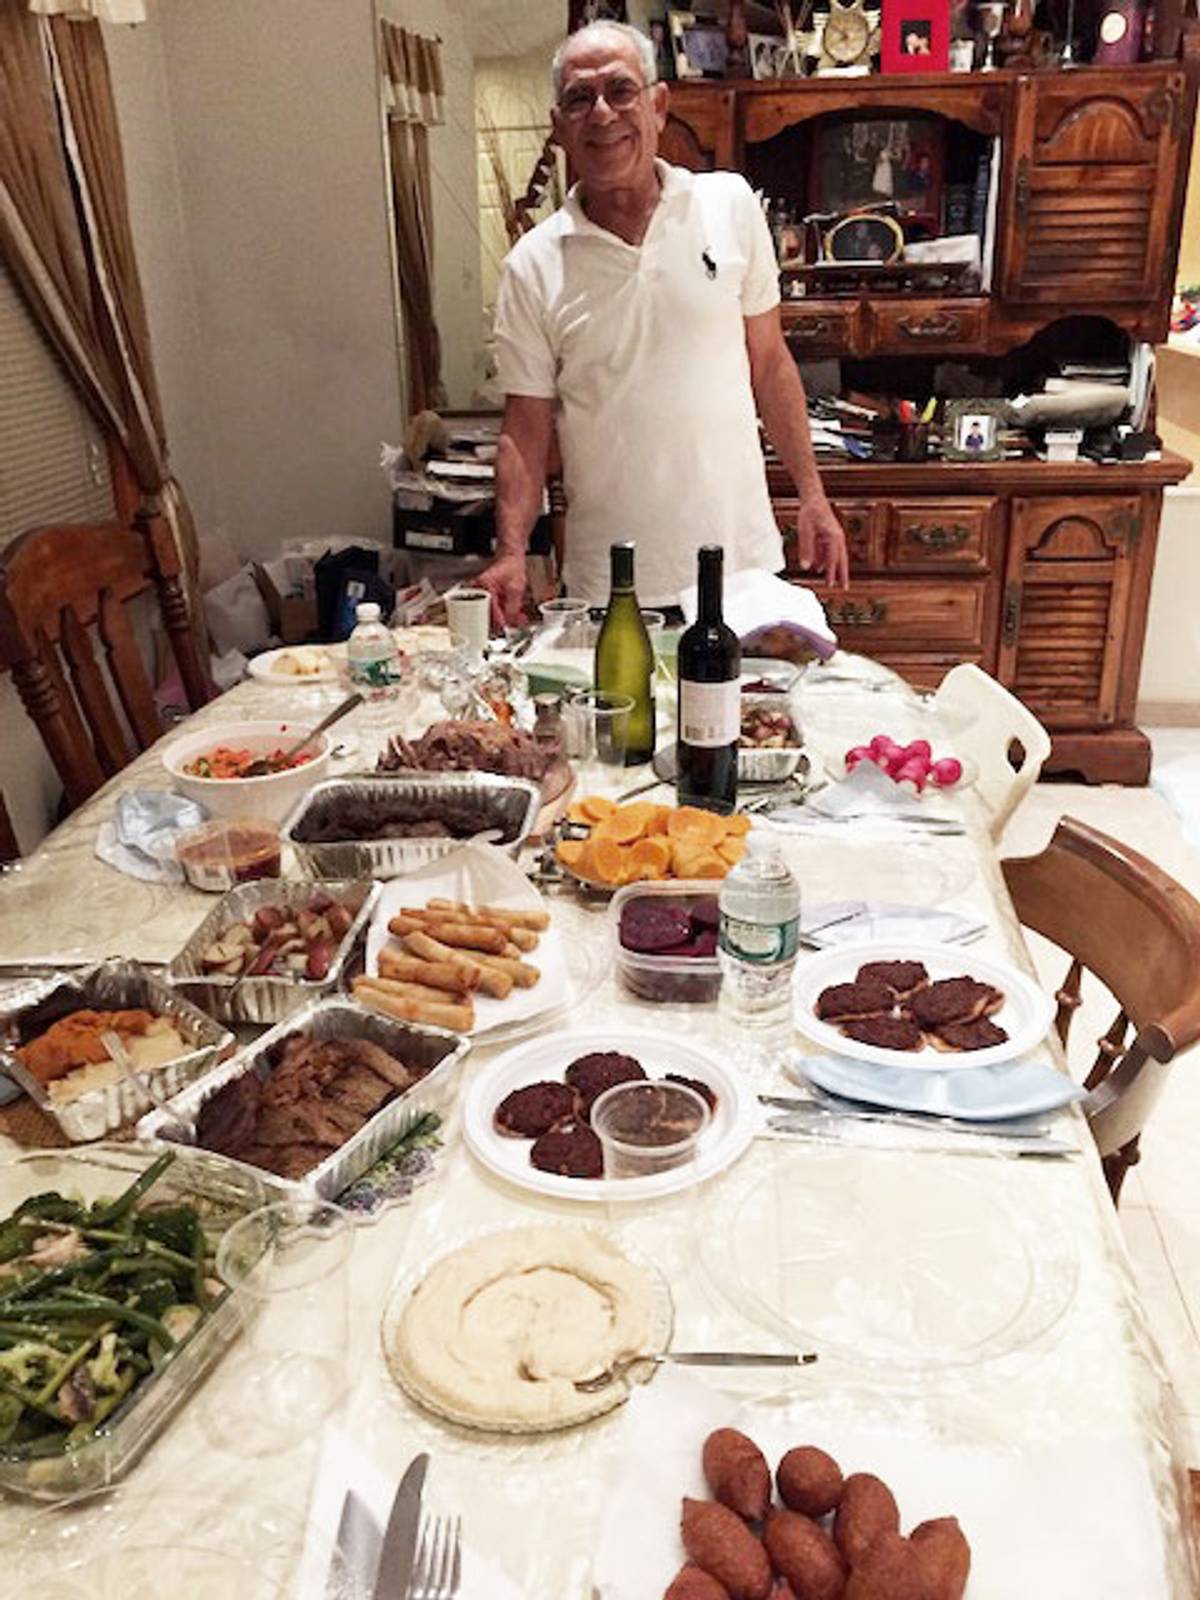 Dad on Rosh Hashanah, with all his homemade delicacies, including hummus